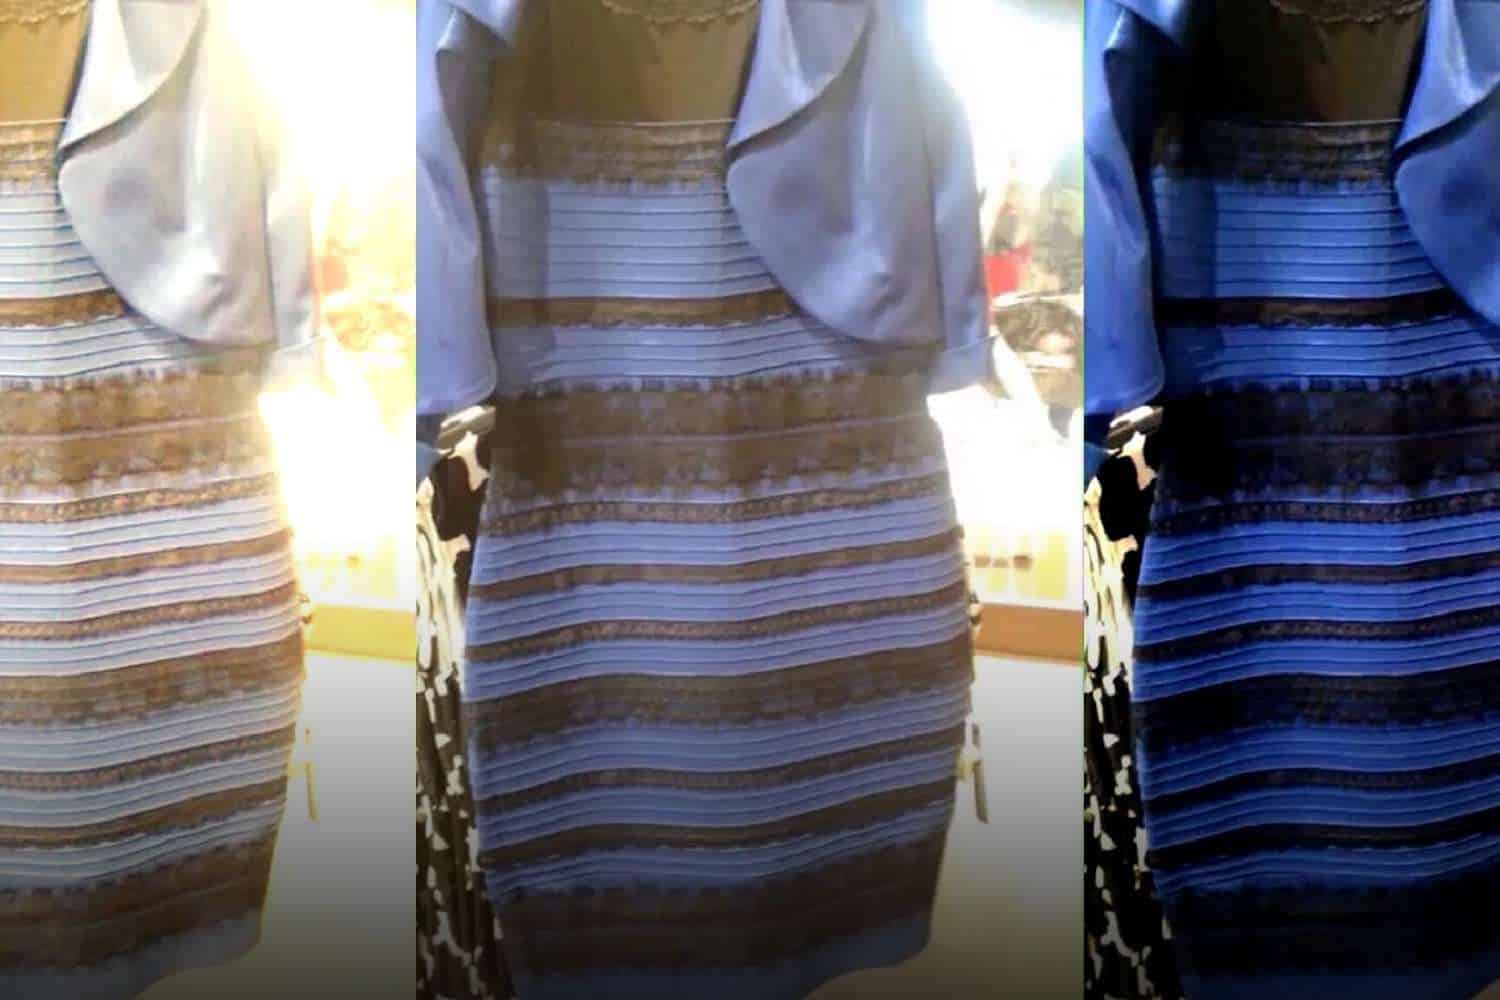 Remember this viral dress? - You won't believe the dark truth behind it ...